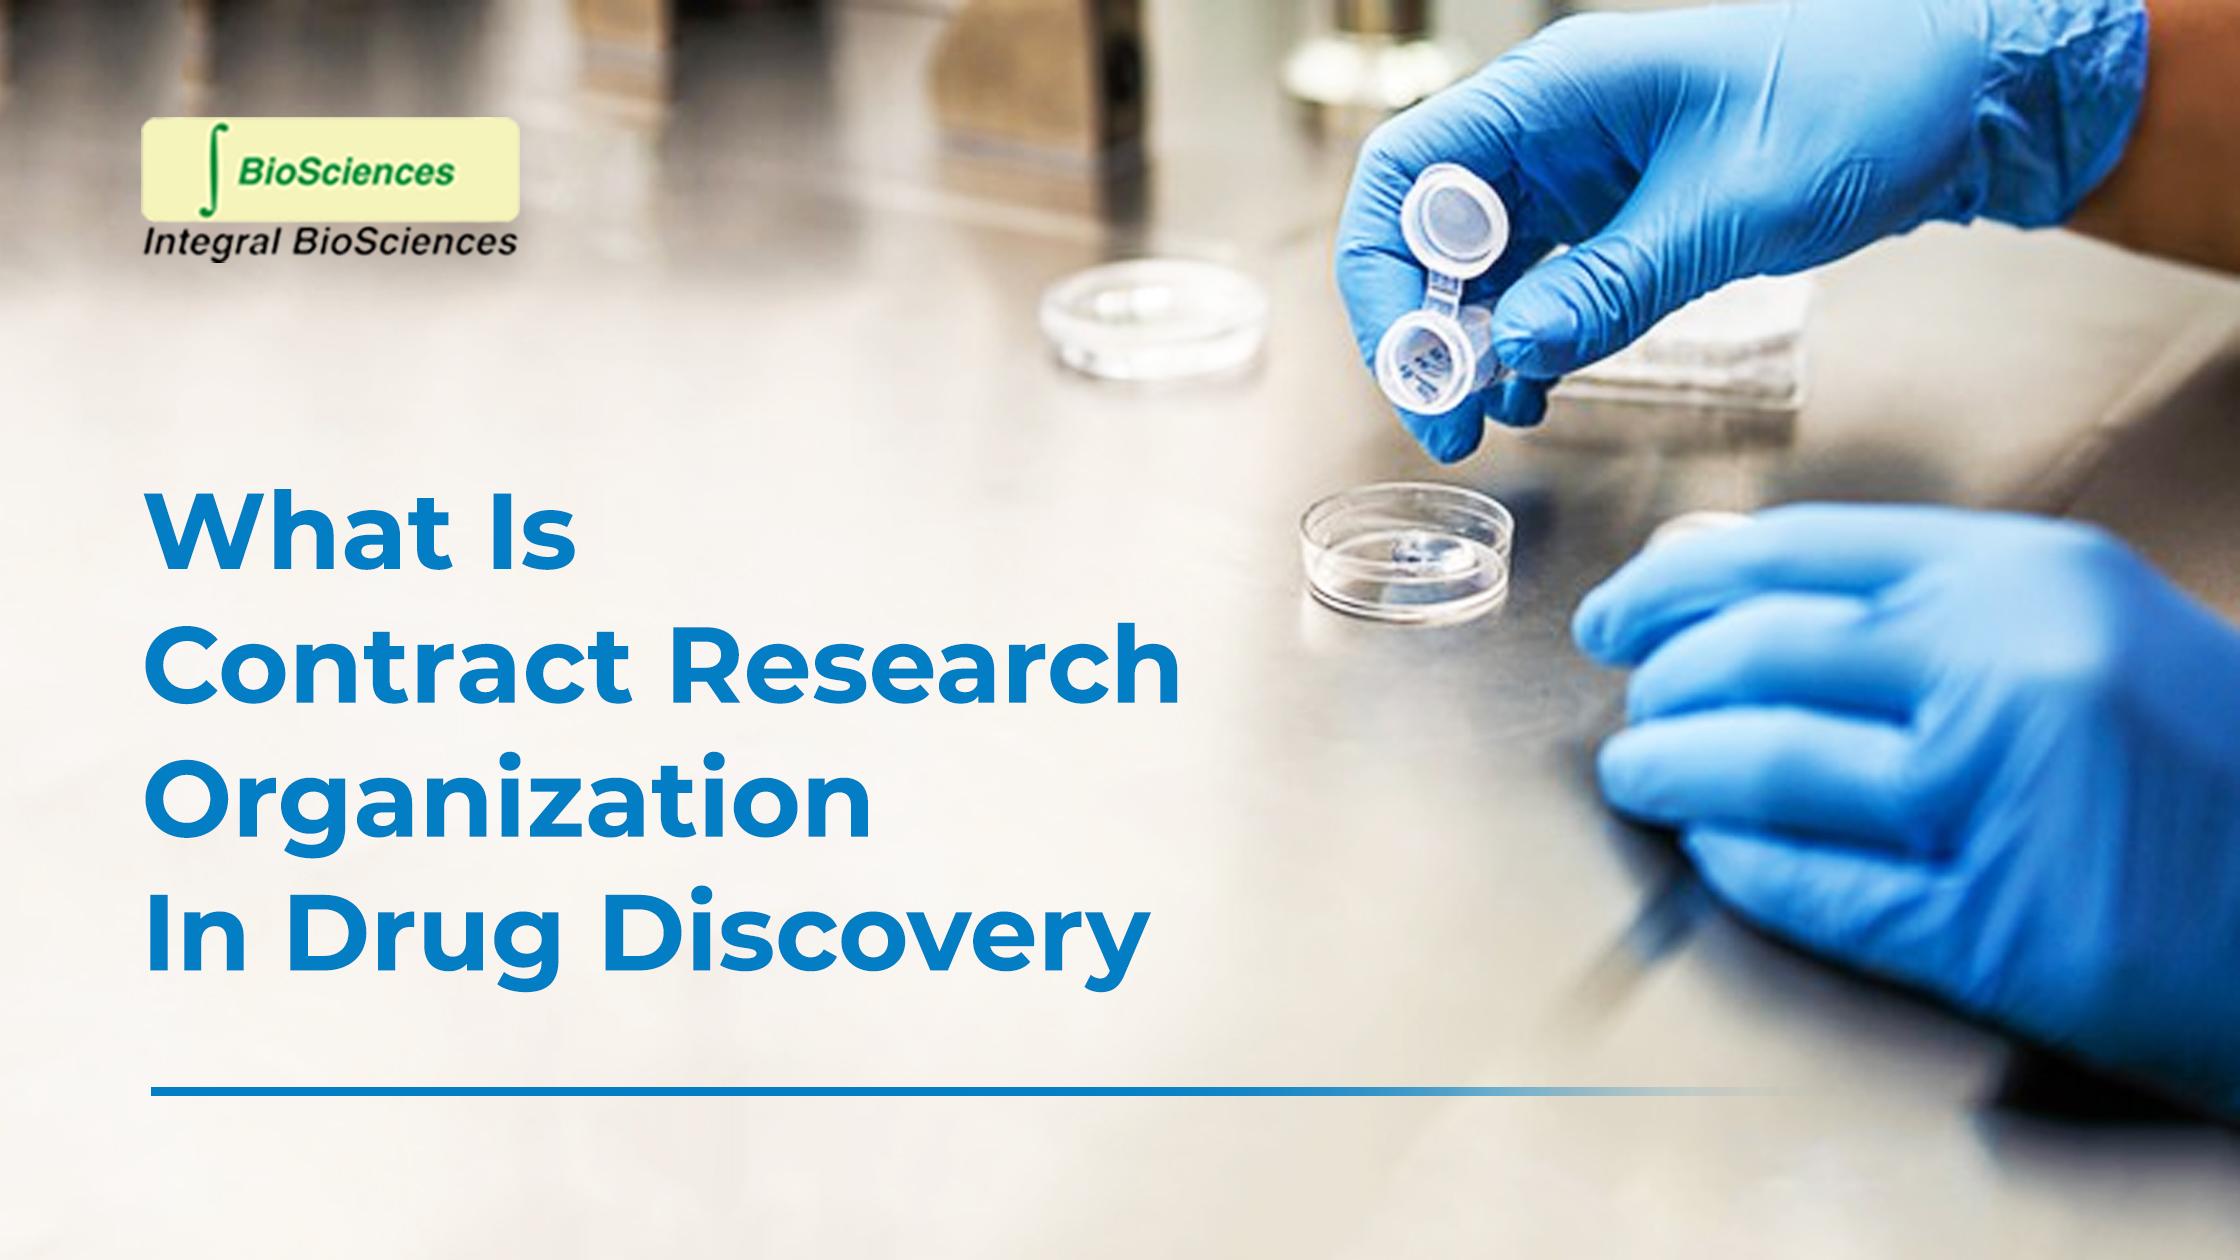 What Is Contract Research Organization in Drug Discovery JustPaste.it